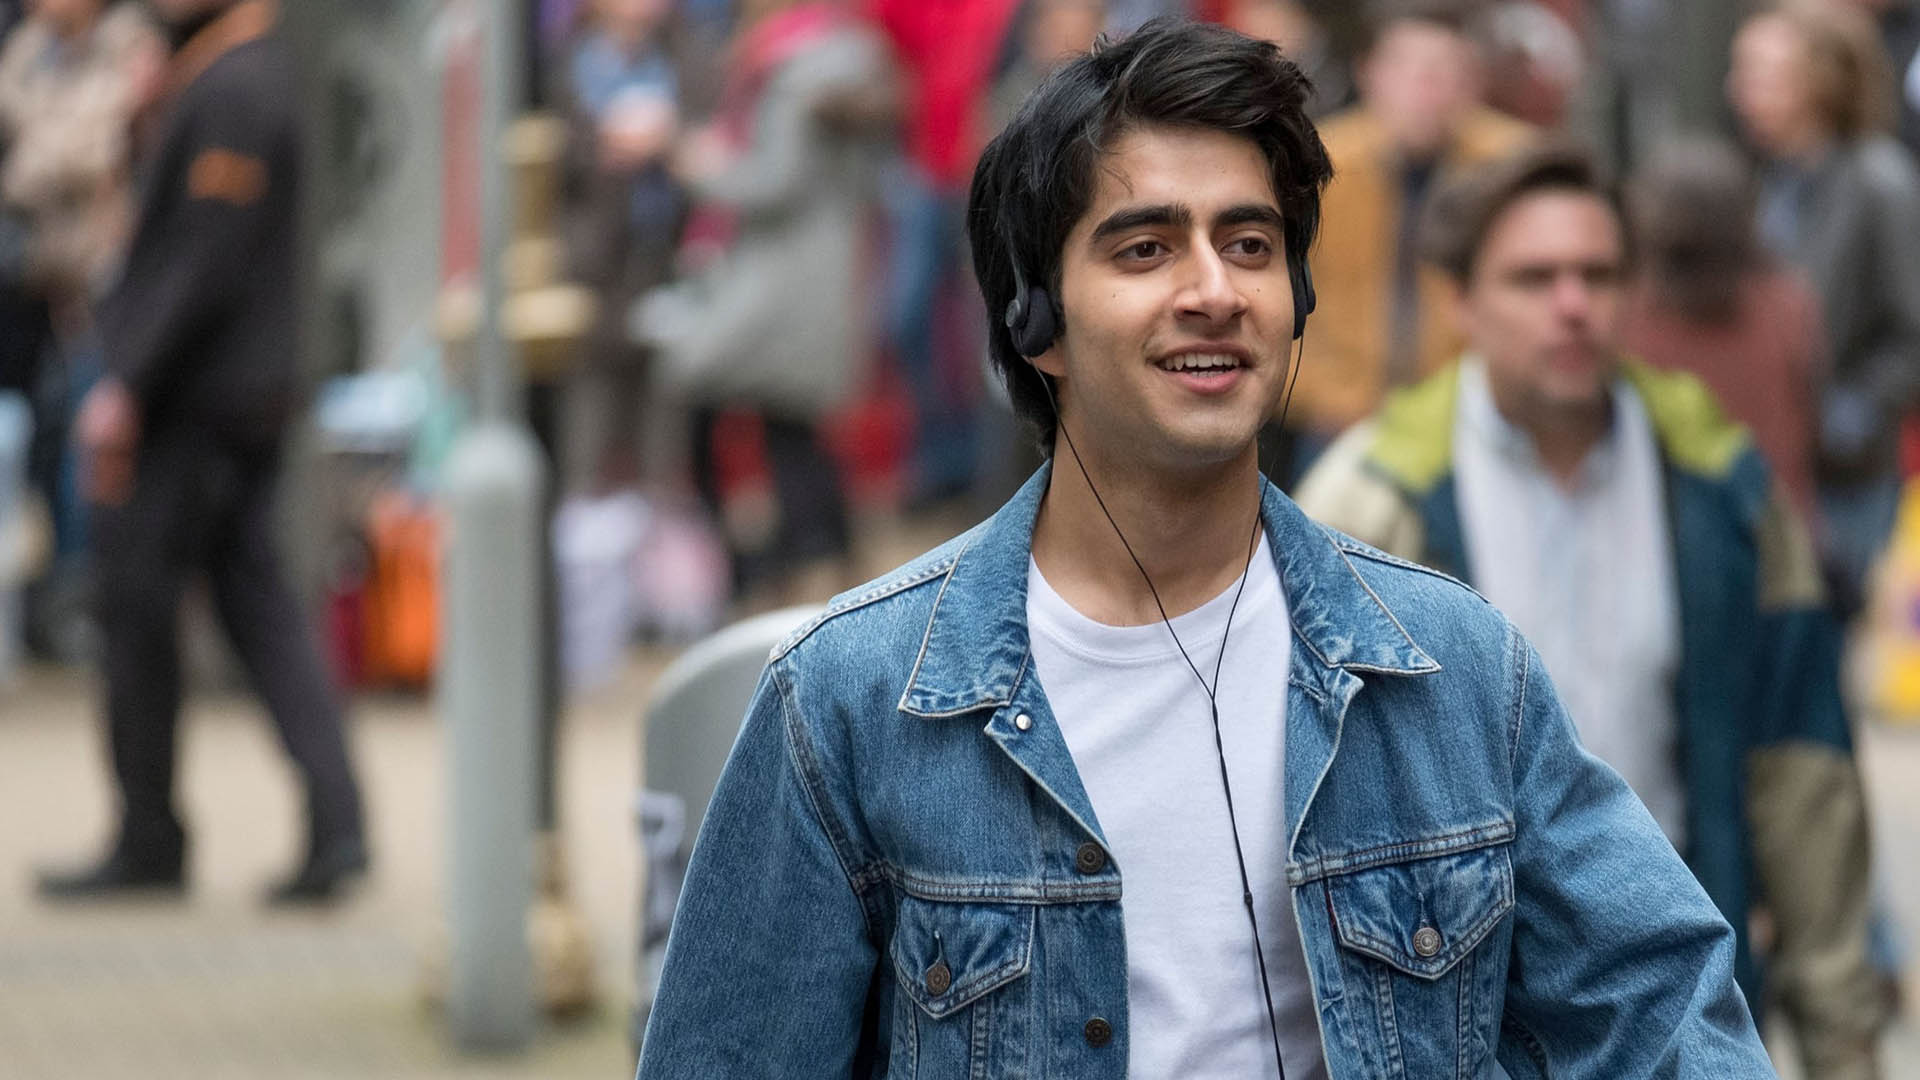 Vivik Kalra, the main character in the movie Blinded by the Light, is listening to music